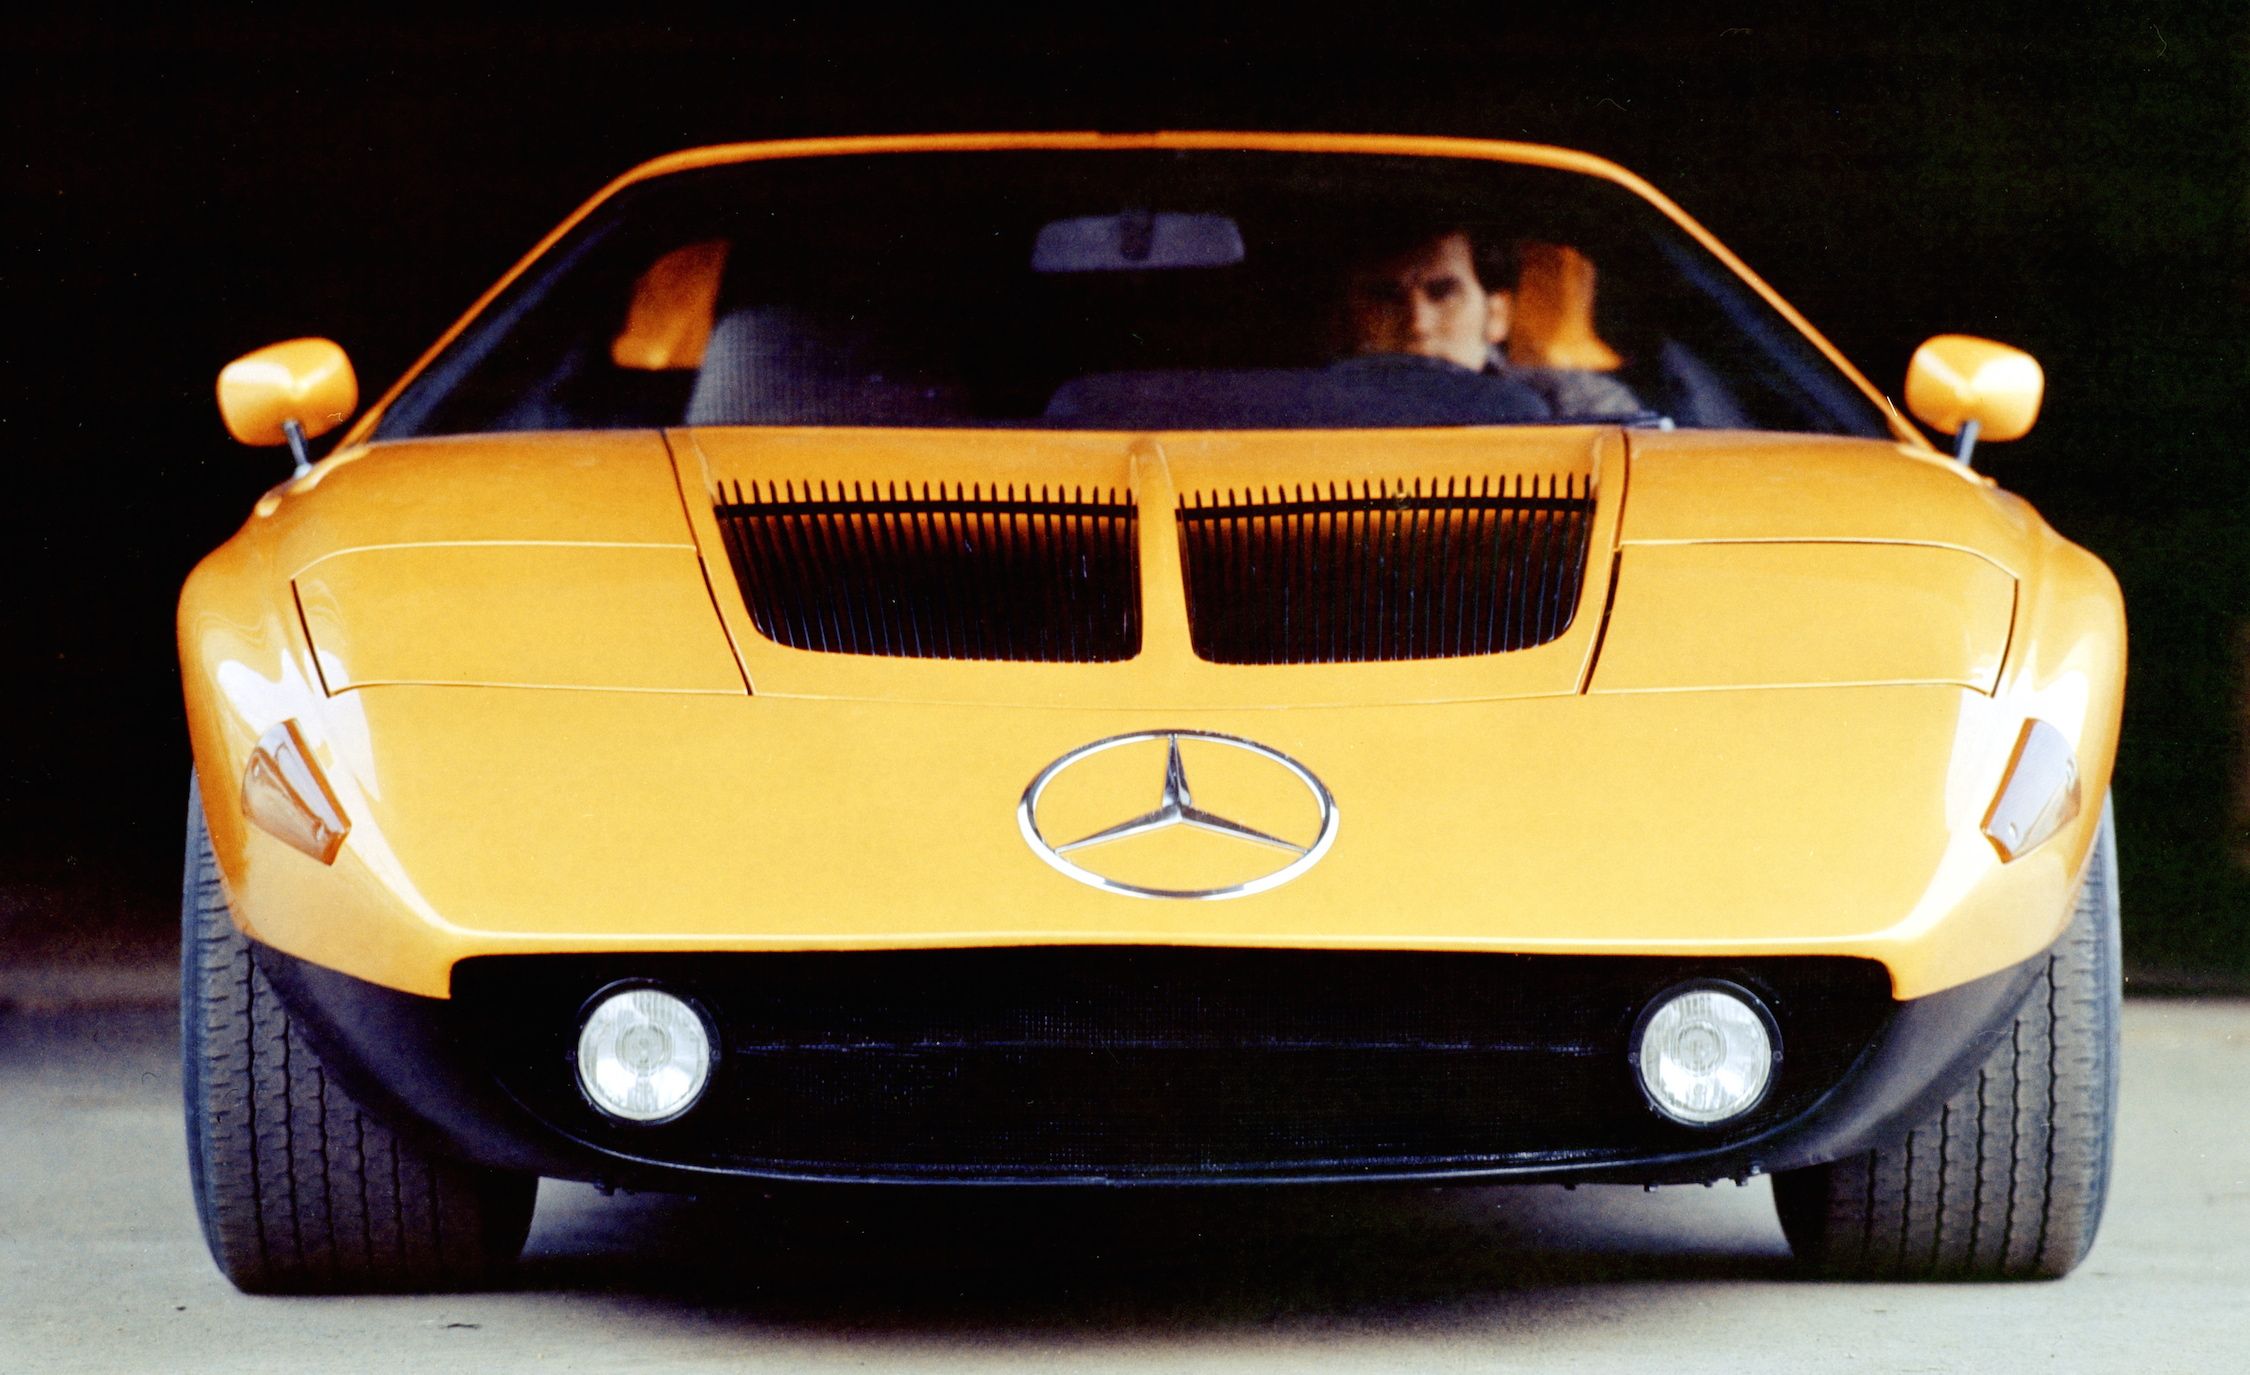 The Greatest Concept Cars of All Time, Volume I